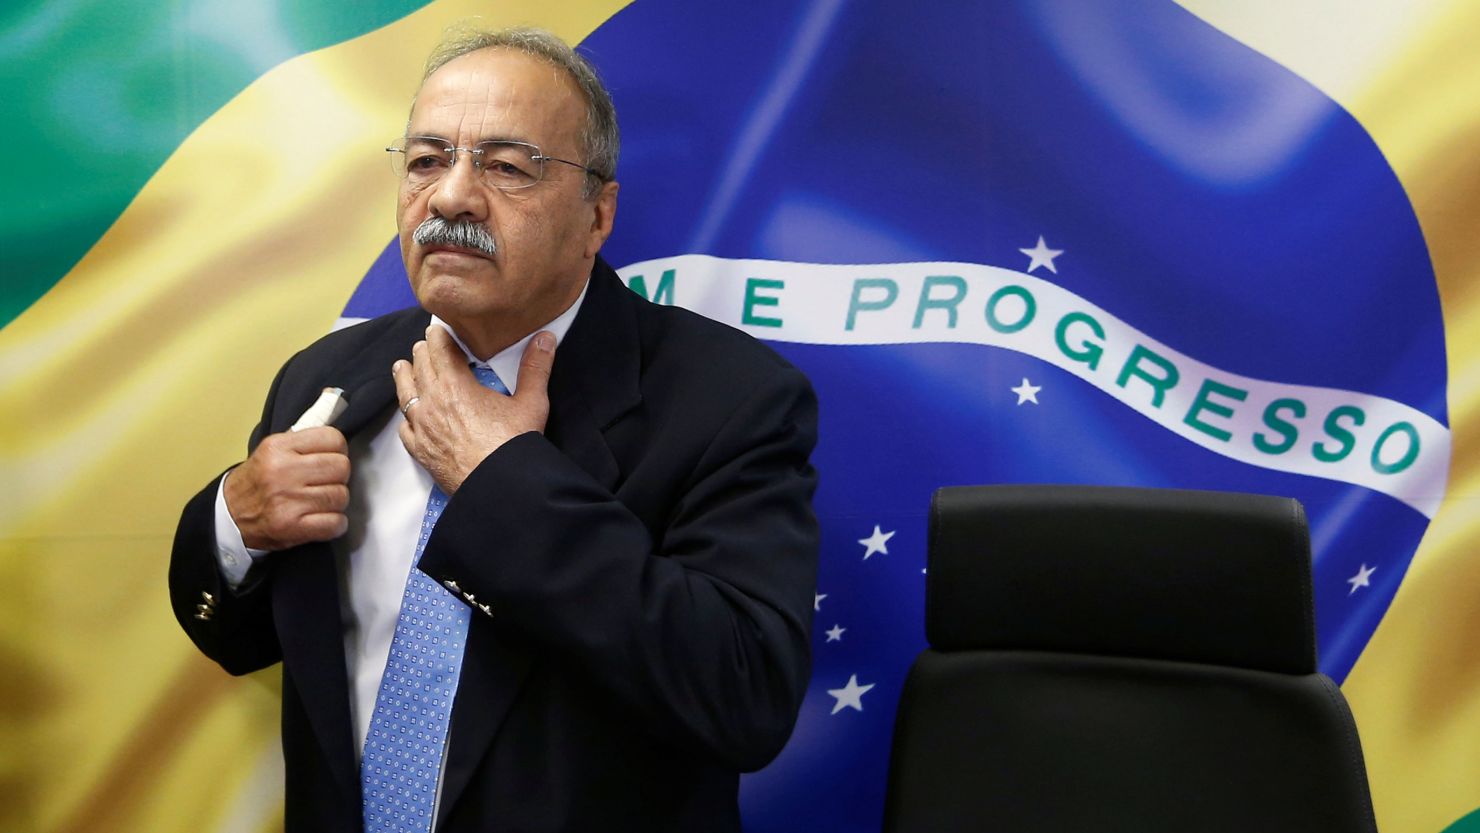 Brazil's Senator Chico Rodrigues reacts during a meeting with Brazilian Federal Deputy Eduardo Bolsonaro (not pictured) at the Federal Senate in Brasilia, Brazil August 9, 2019.